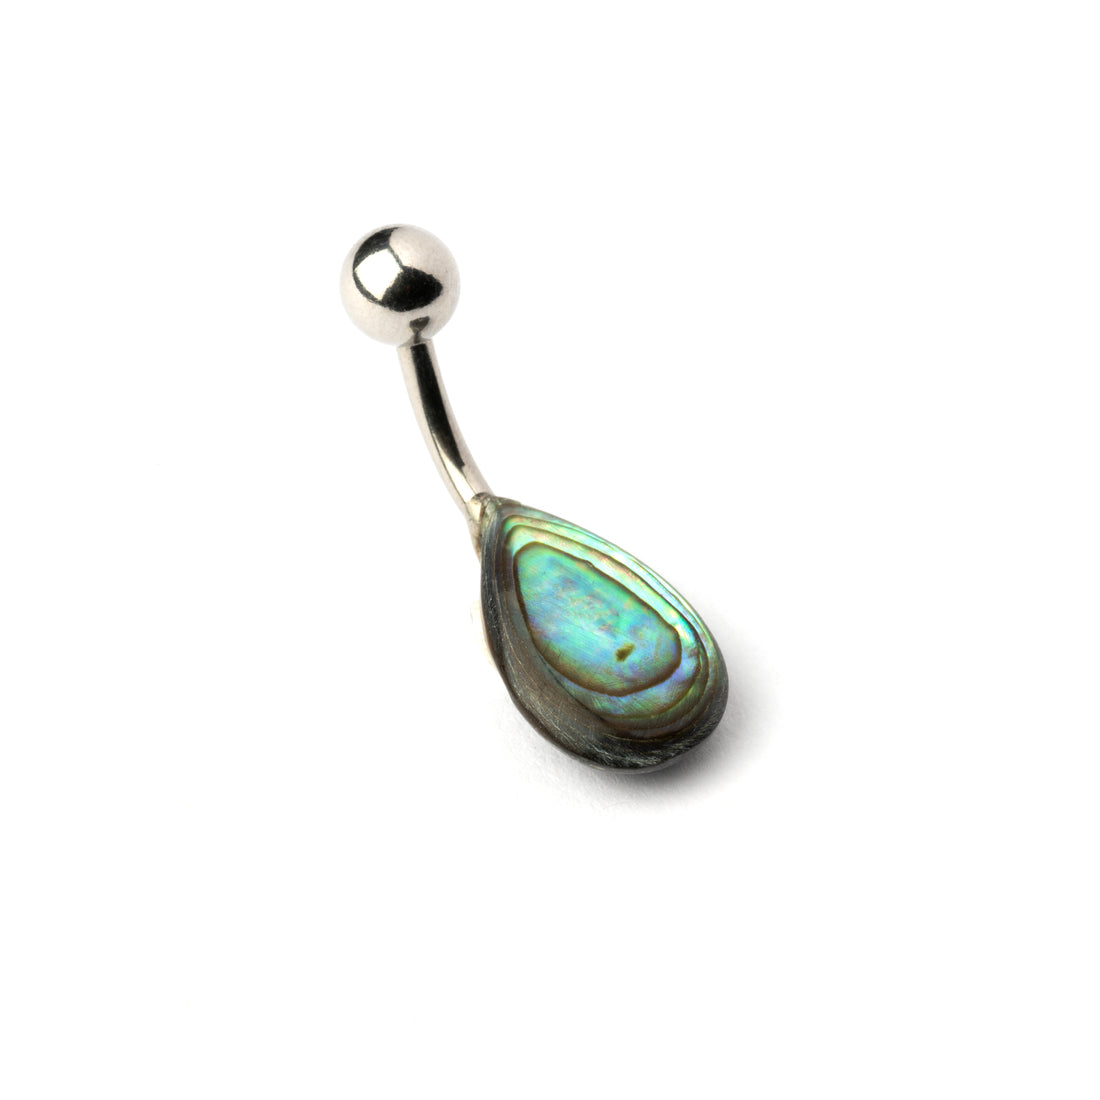 teardrop shaped abalone shell belly piercing on a surgical steel bar right side view